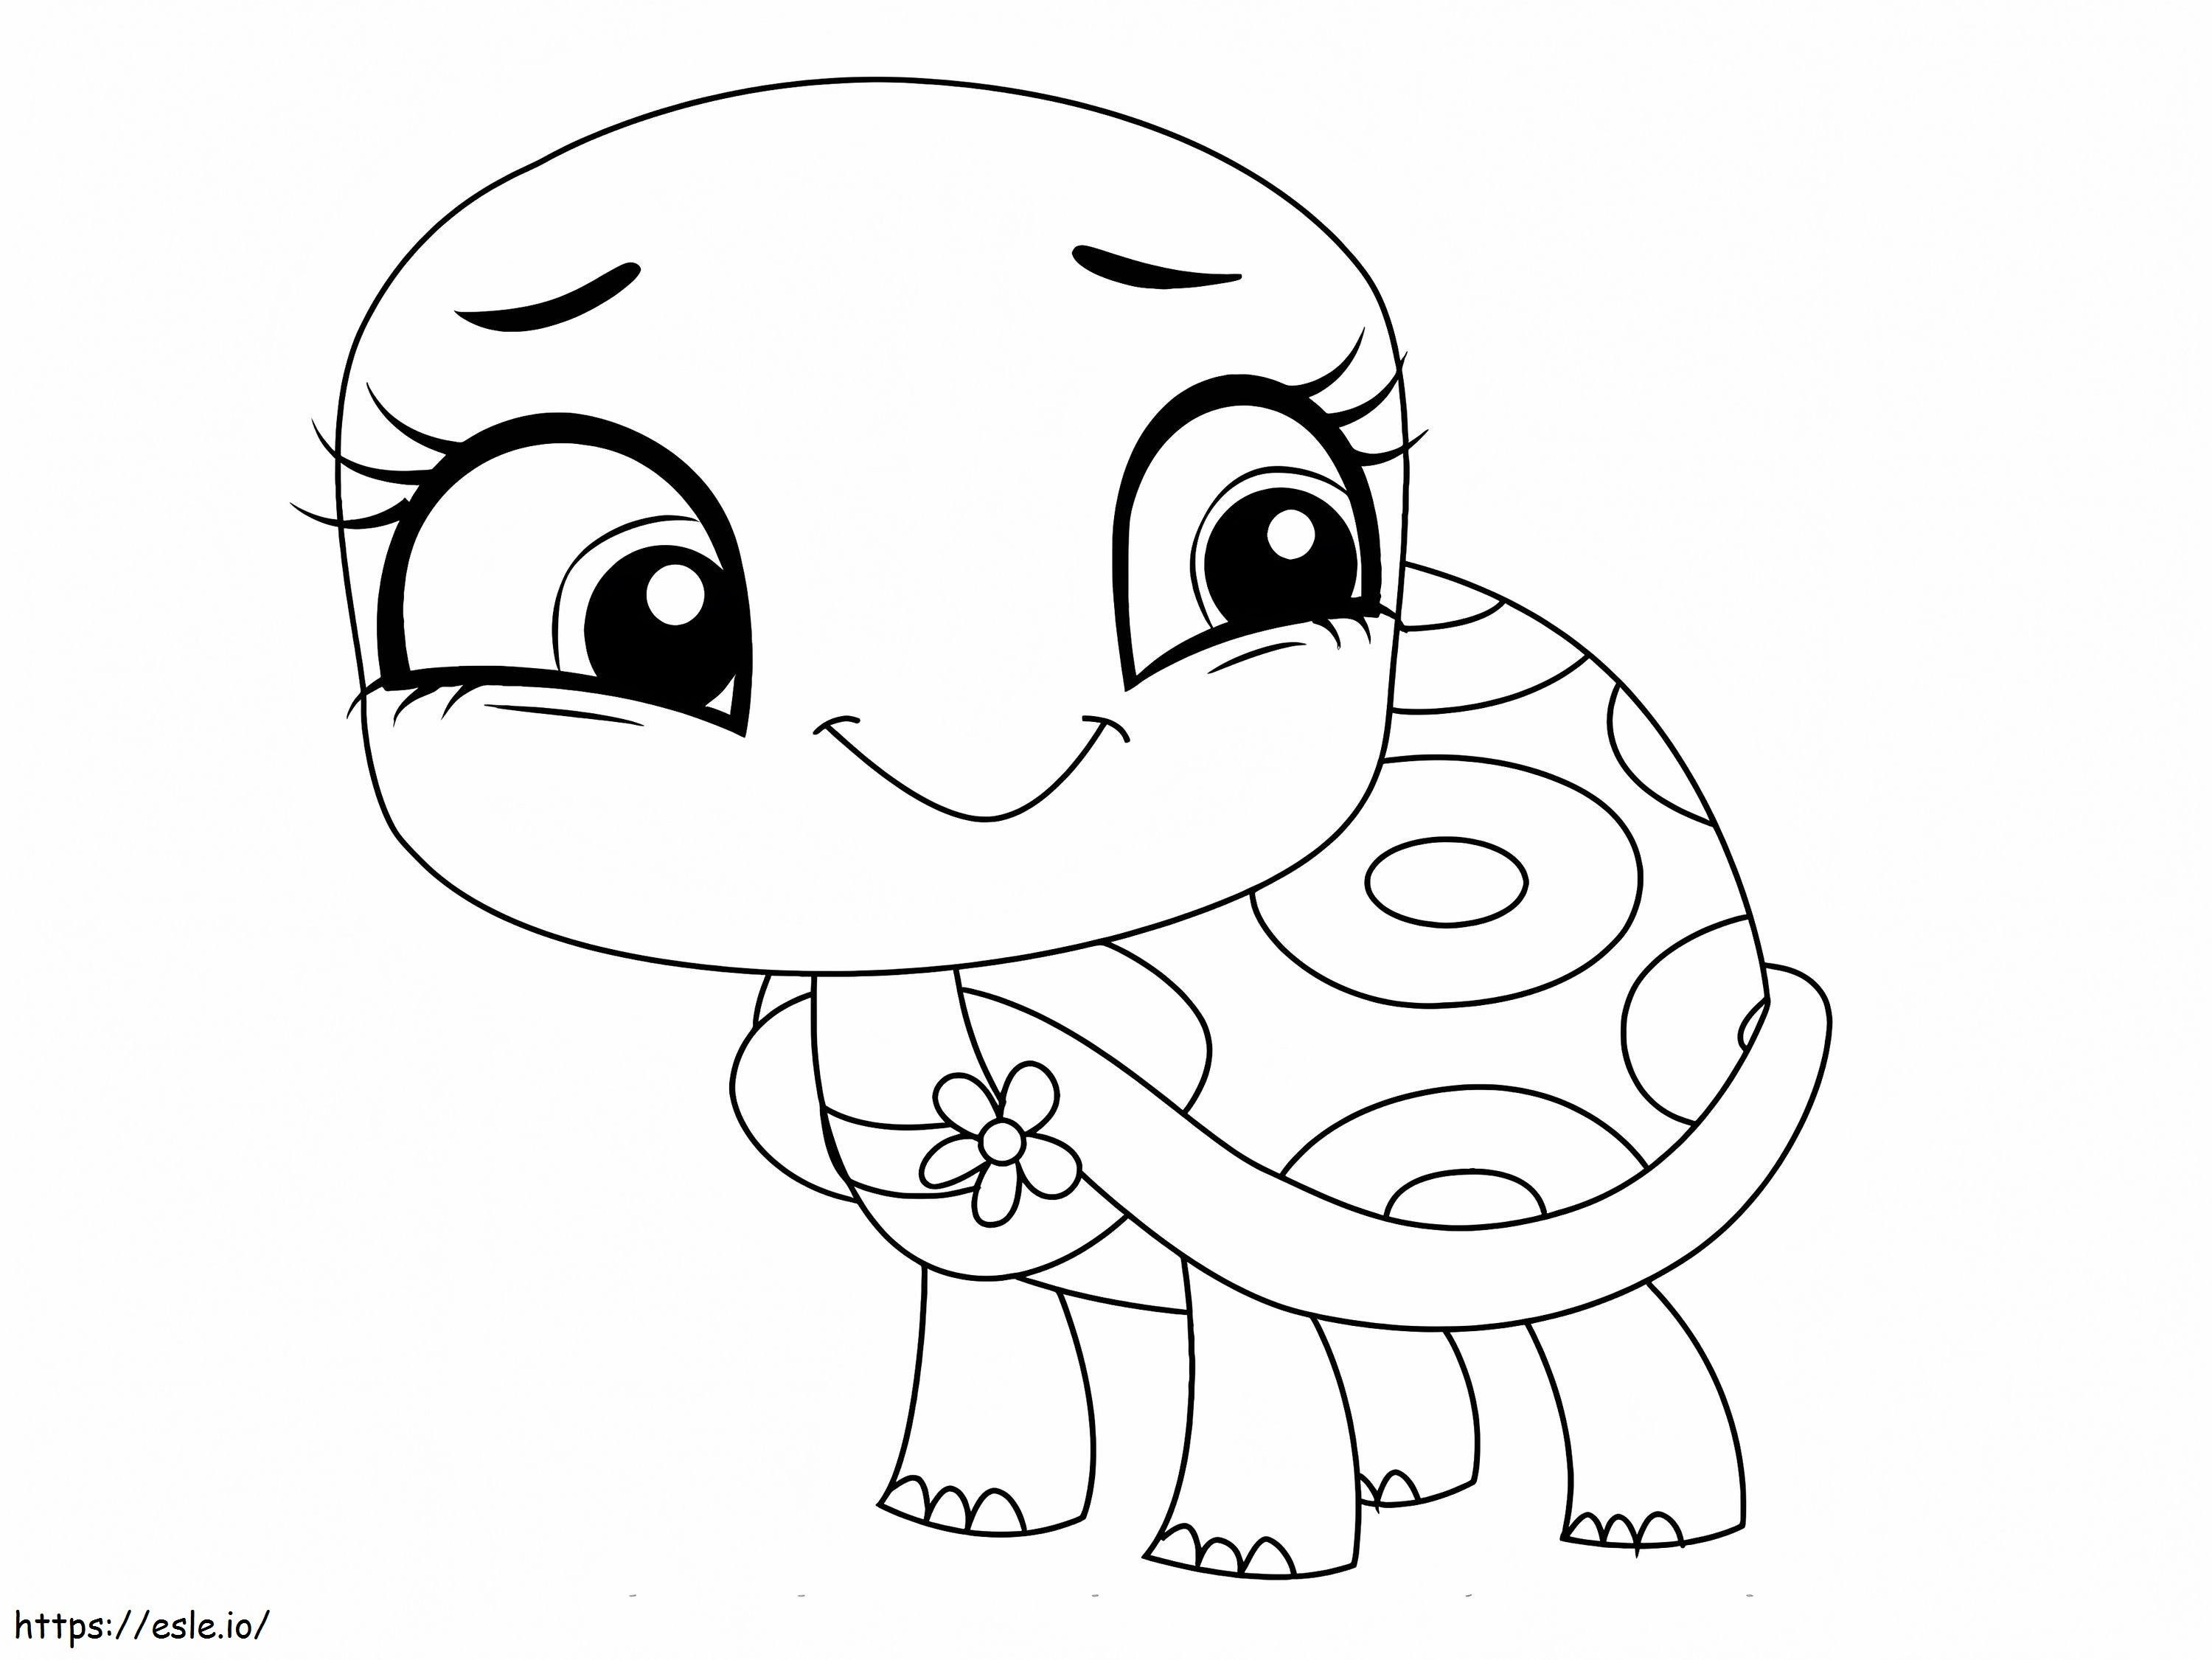 How To Draw Olive Shellstein From Littlest Pet Shop Step 0 coloring page